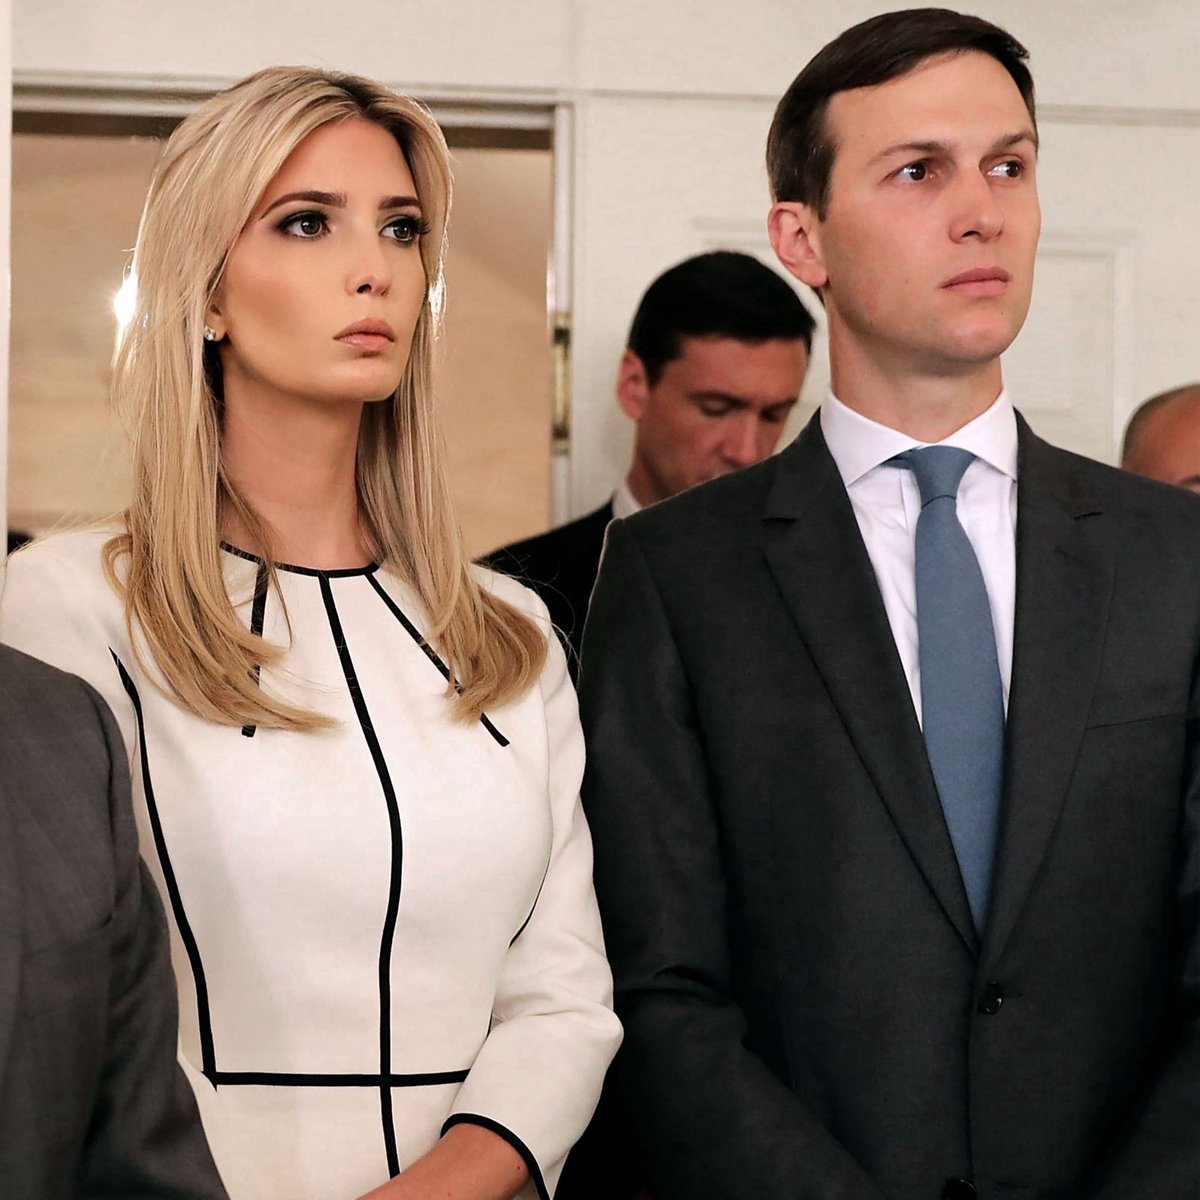 BREAKING: Ivanka's motion to get out of testifying because it's 'during the school week' was denied. Jared is available to babysit for the very reasonable price of $2 billion.